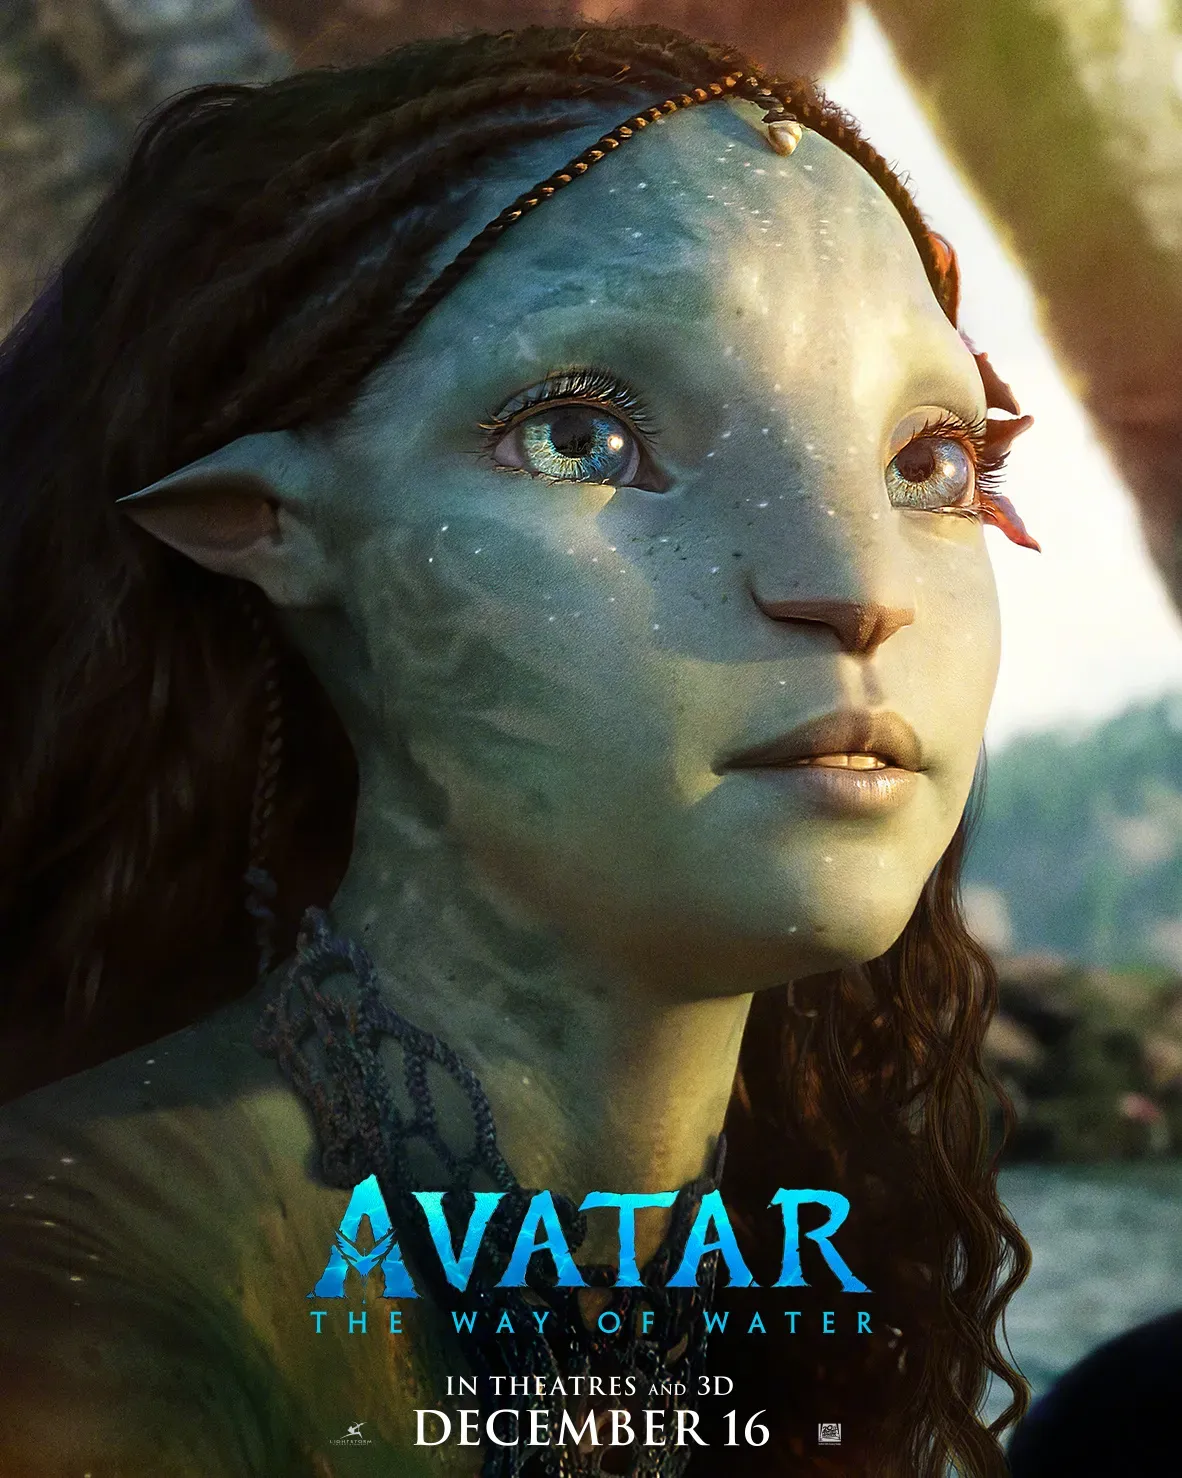 'Avatar: The Way of Water' Releases Character Posters and Announces Pre-Orders Have Started | FMV6